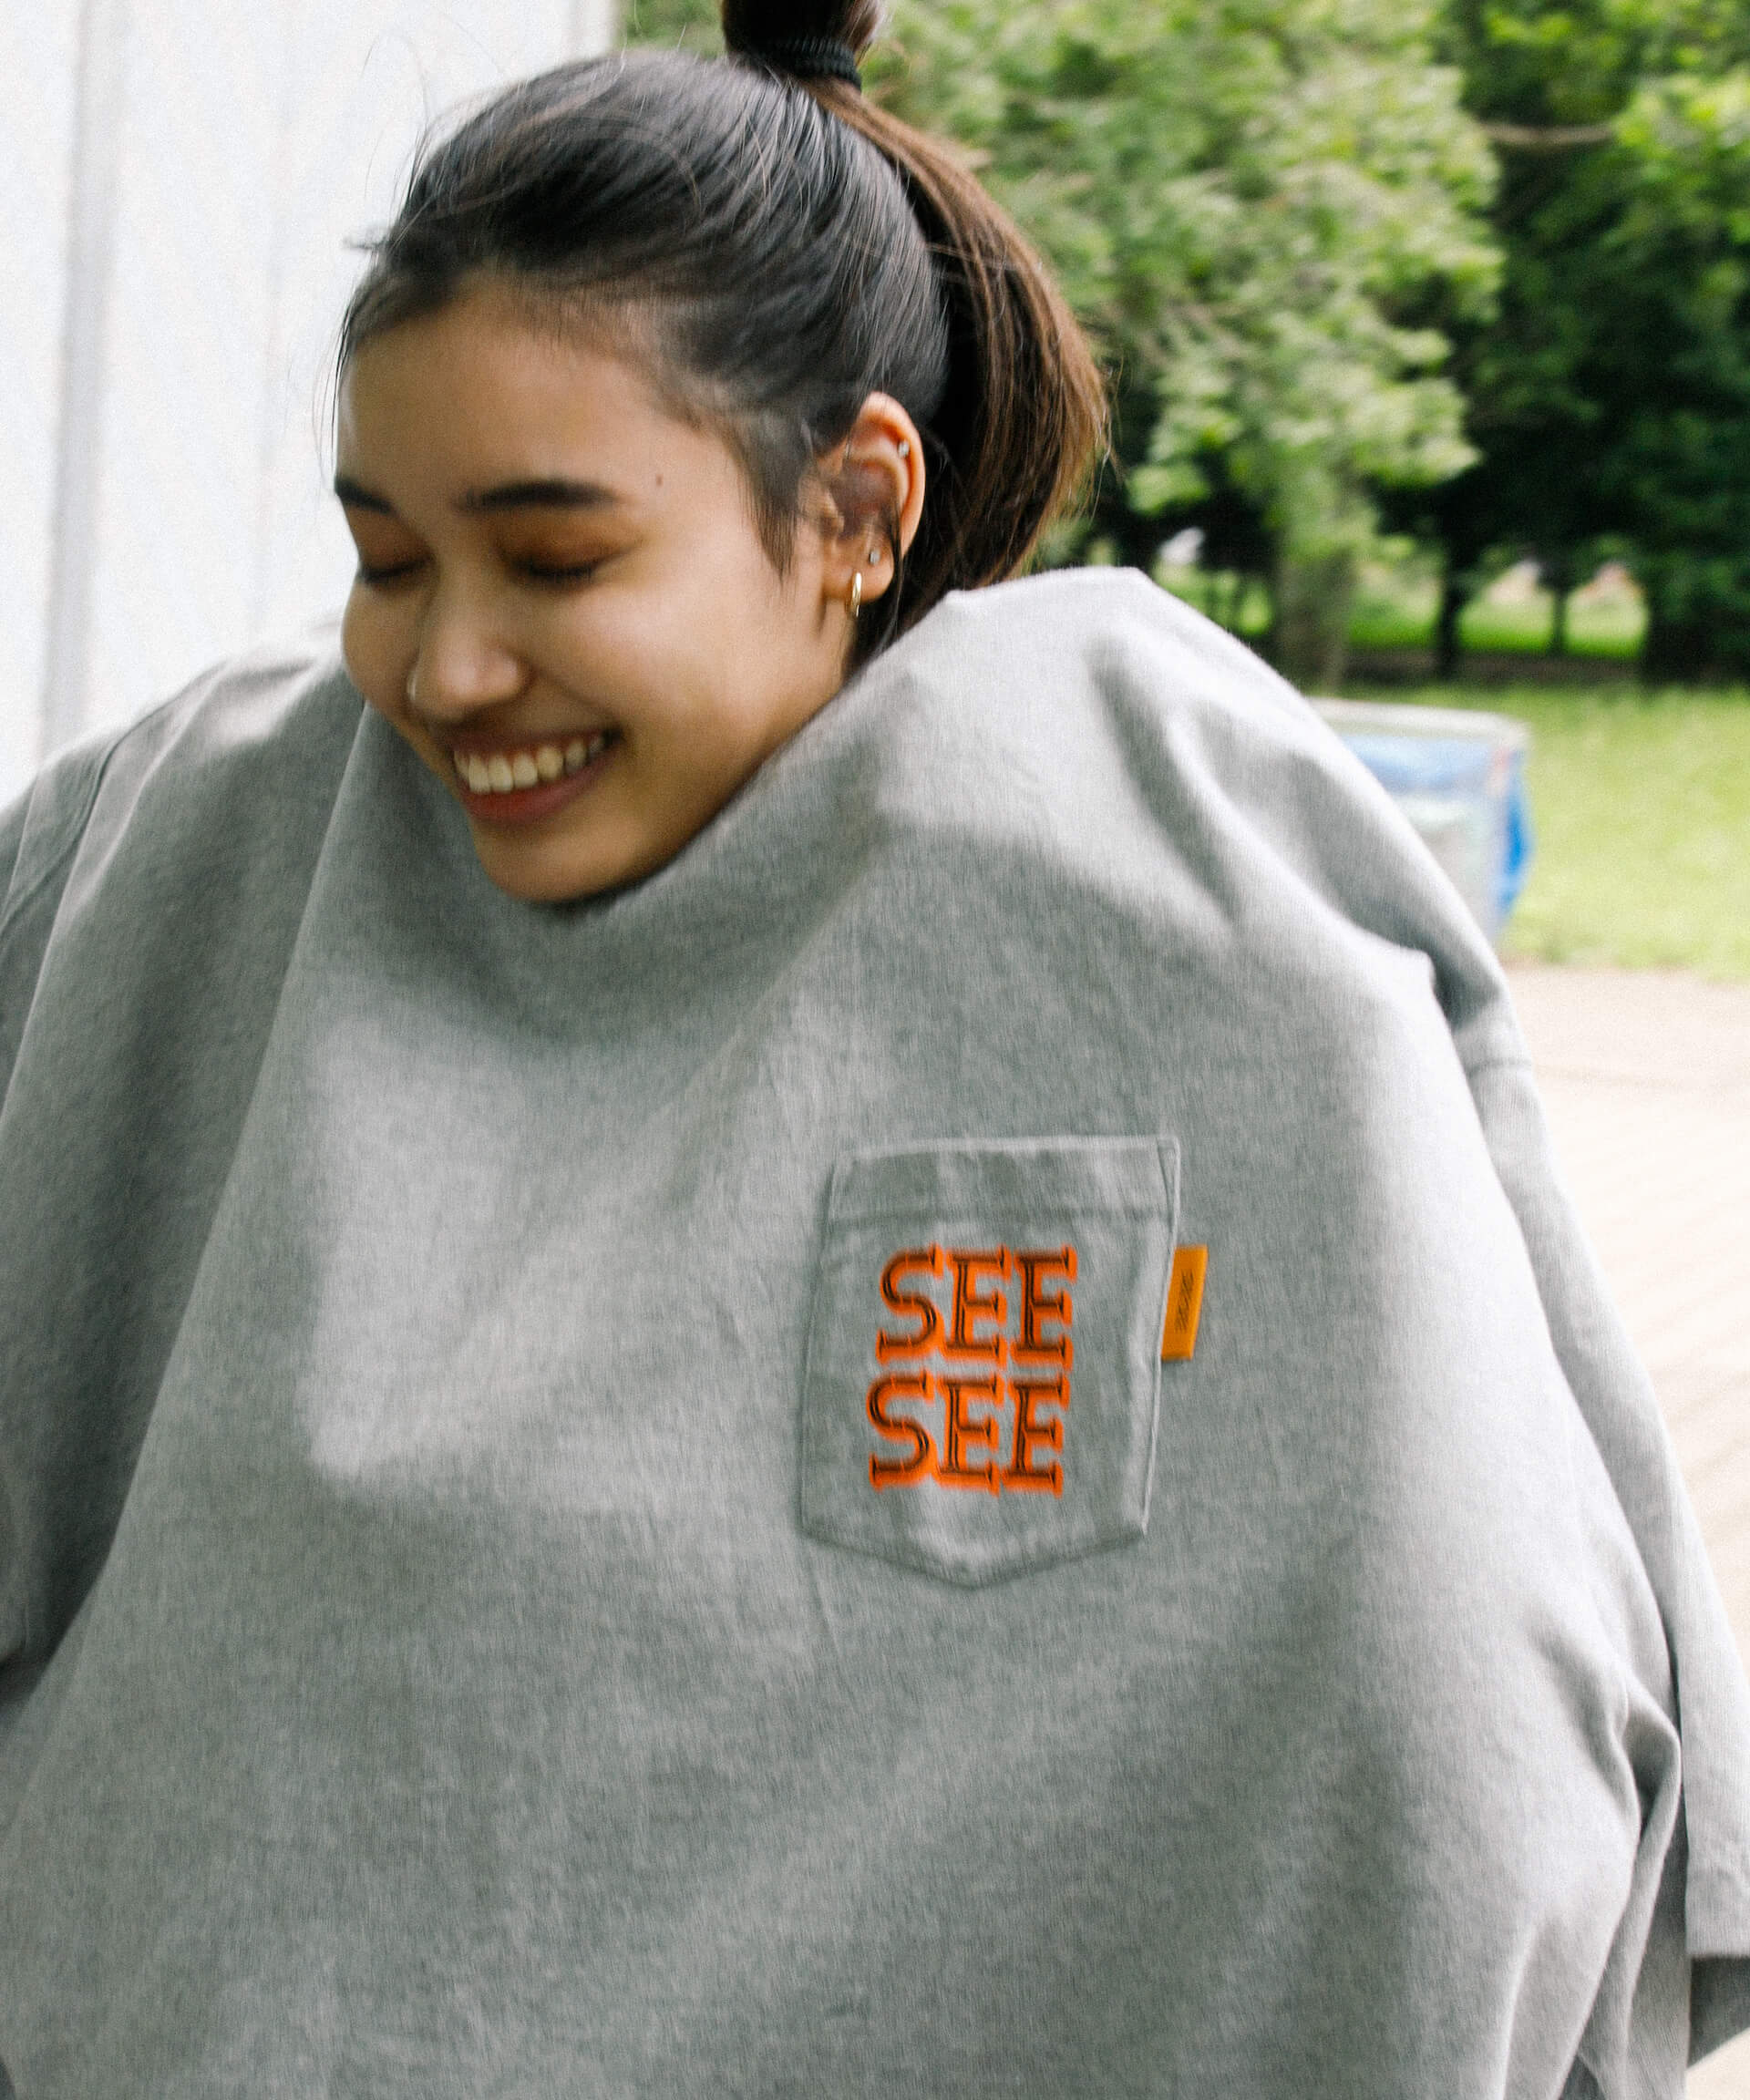 「SEESEE」TシャツコレクションがURBAN RESEARCH BUYERS SELECTにてリリース fashion230614_seesee-015